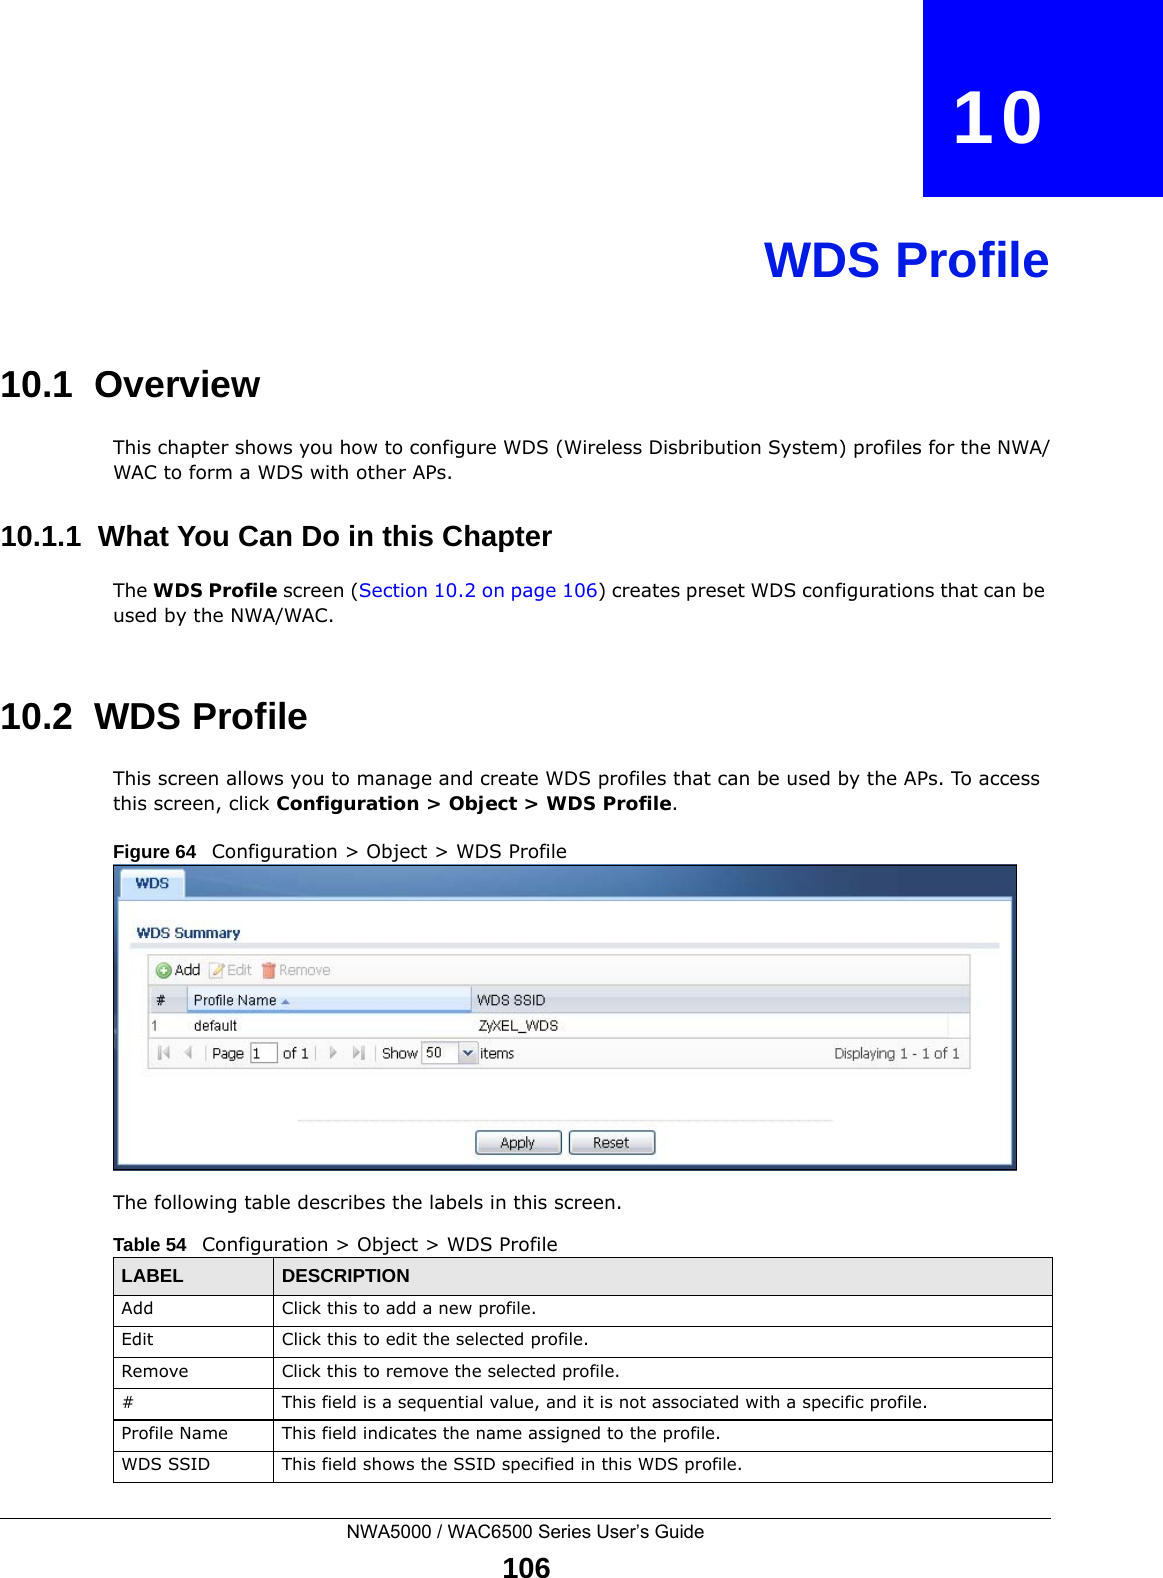 NWA5000 / WAC6500 Series User’s Guide106CHAPTER   10WDS Profile10.1  OverviewThis chapter shows you how to configure WDS (Wireless Disbribution System) profiles for the NWA/WAC to form a WDS with other APs.10.1.1  What You Can Do in this ChapterThe WDS Profile screen (Section 10.2 on page 106) creates preset WDS configurations that can be used by the NWA/WAC.10.2  WDS Profile This screen allows you to manage and create WDS profiles that can be used by the APs. To access this screen, click Configuration &gt; Object &gt; WDS Profile.Figure 64   Configuration &gt; Object &gt; WDS ProfileThe following table describes the labels in this screen.  Table 54   Configuration &gt; Object &gt; WDS ProfileLABEL DESCRIPTIONAdd Click this to add a new profile.Edit Click this to edit the selected profile.Remove Click this to remove the selected profile.# This field is a sequential value, and it is not associated with a specific profile.Profile Name This field indicates the name assigned to the profile.WDS SSID This field shows the SSID specified in this WDS profile.